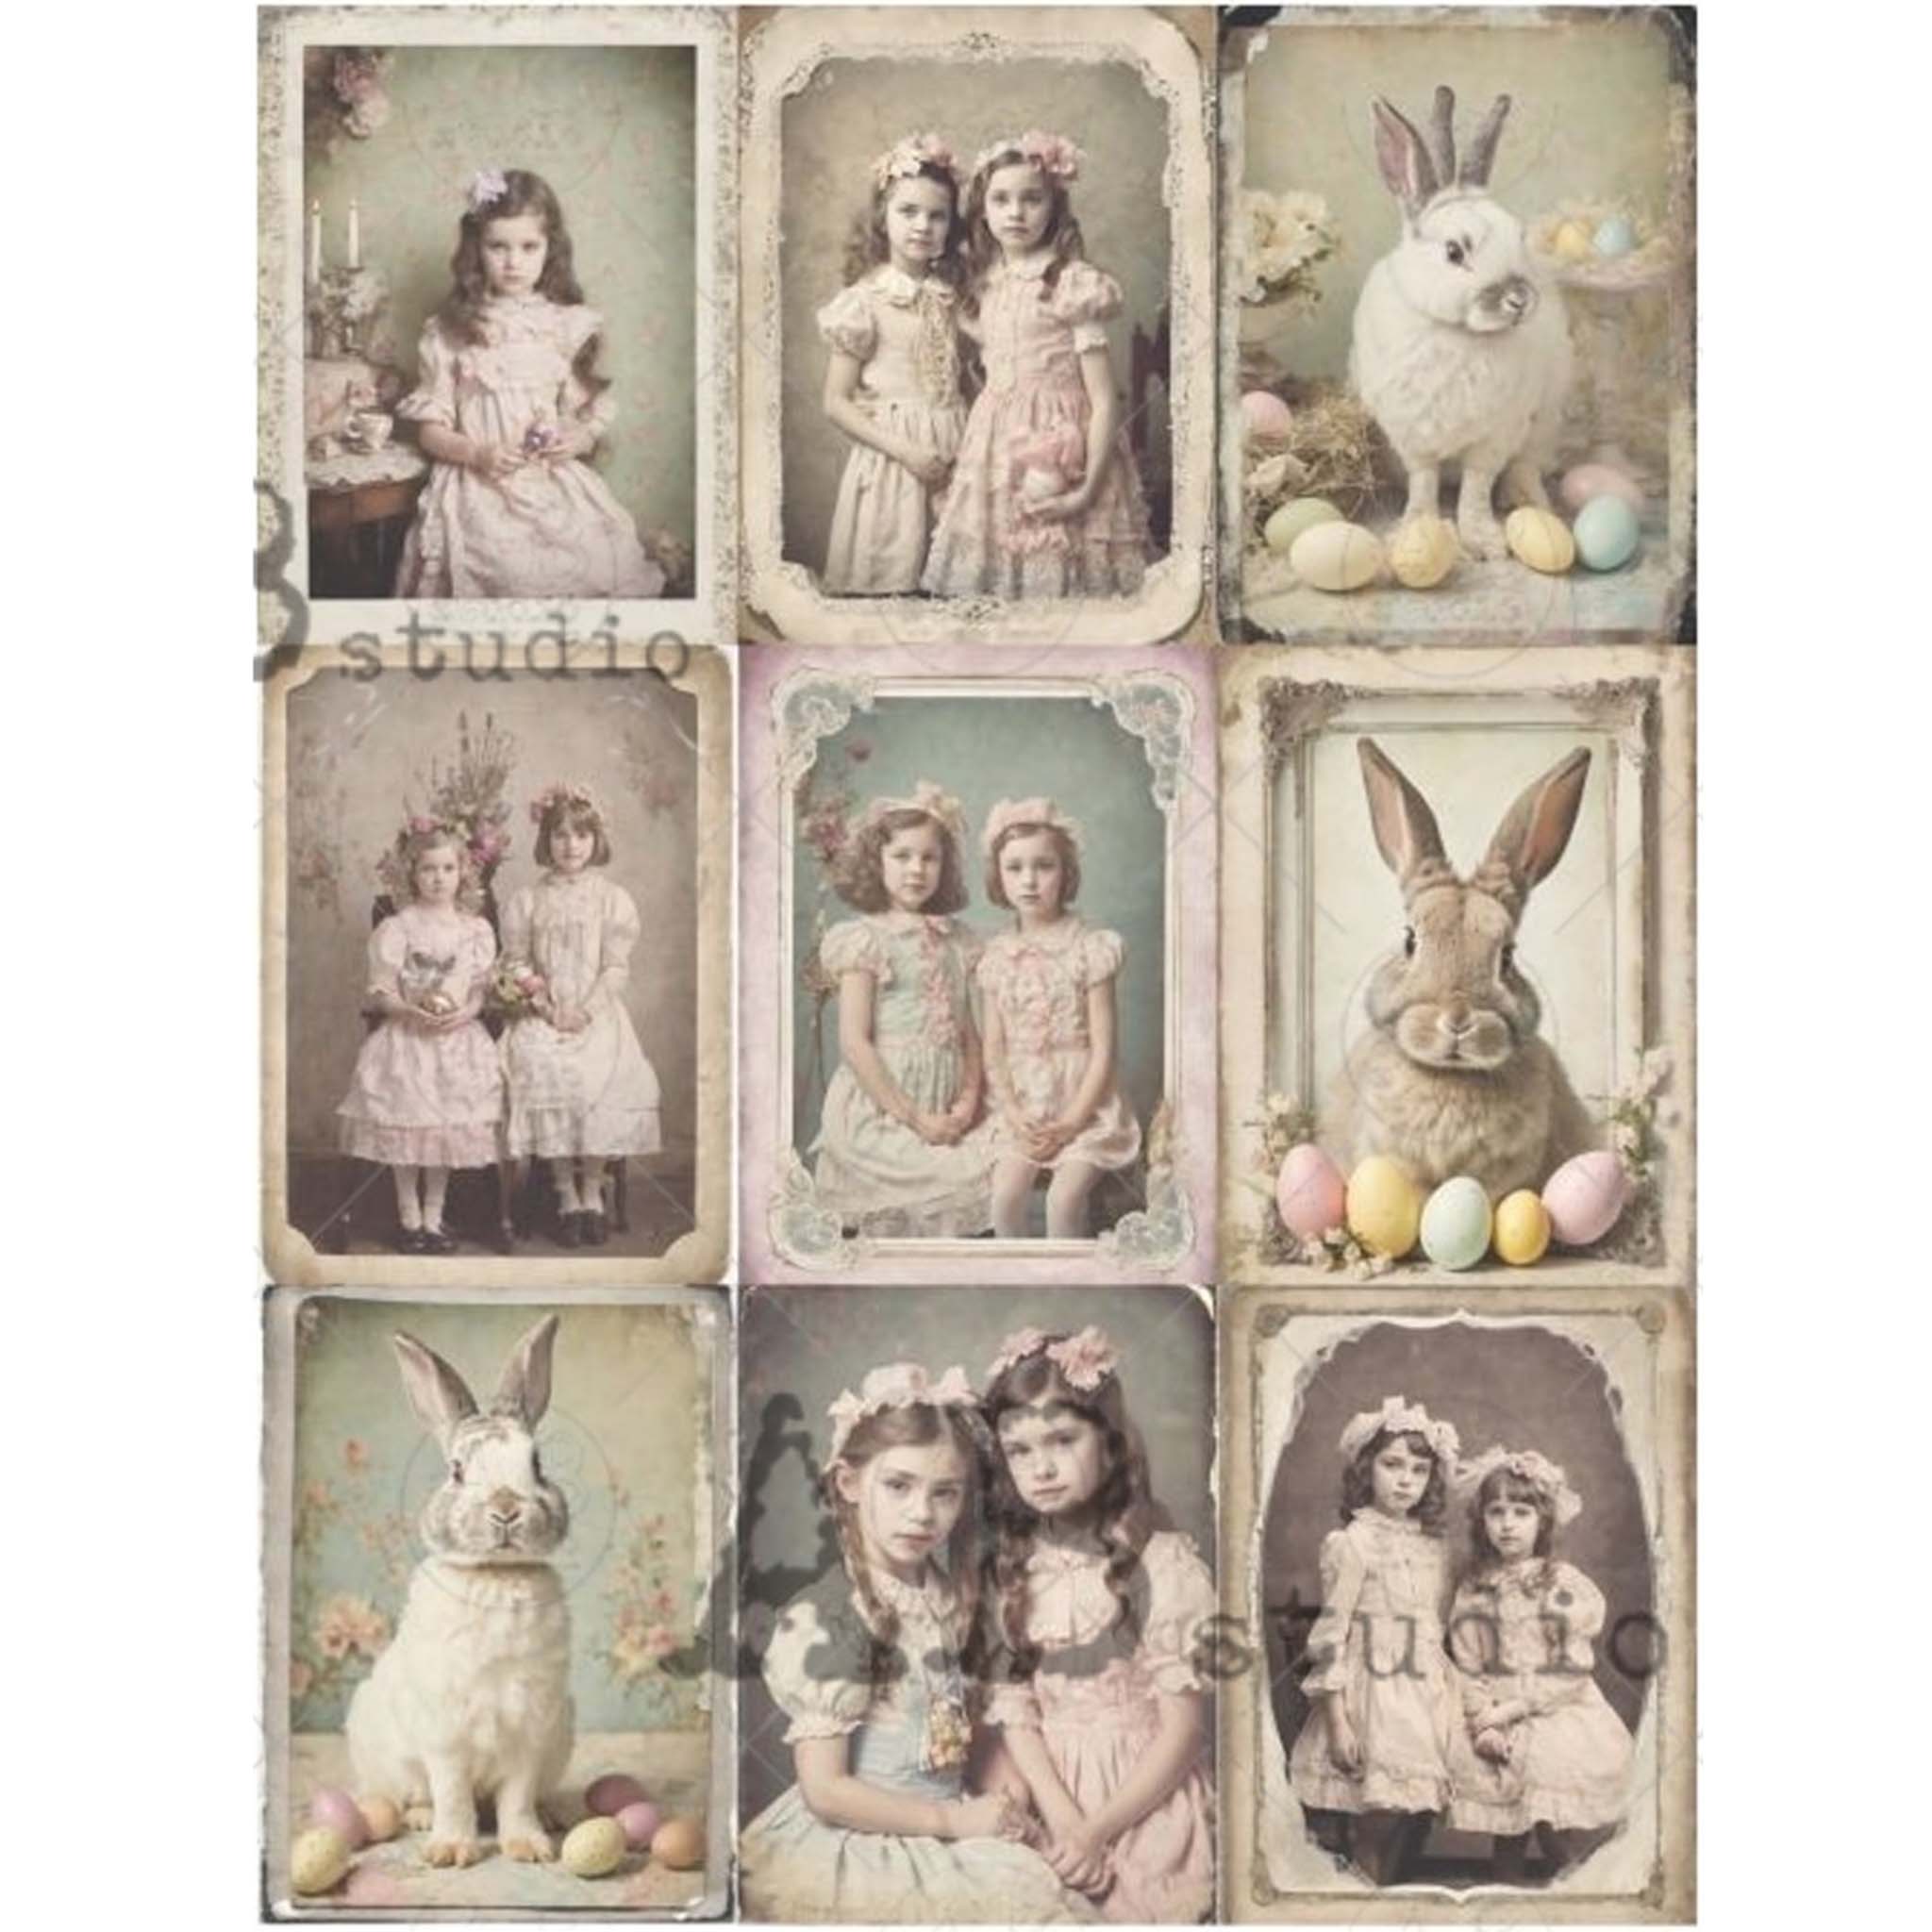 An A4 rice paper that features 9 unique designs, including adorable bunnies with Easter eggs and charming vintage portraits of little girls in Easter dresses is against a white background.